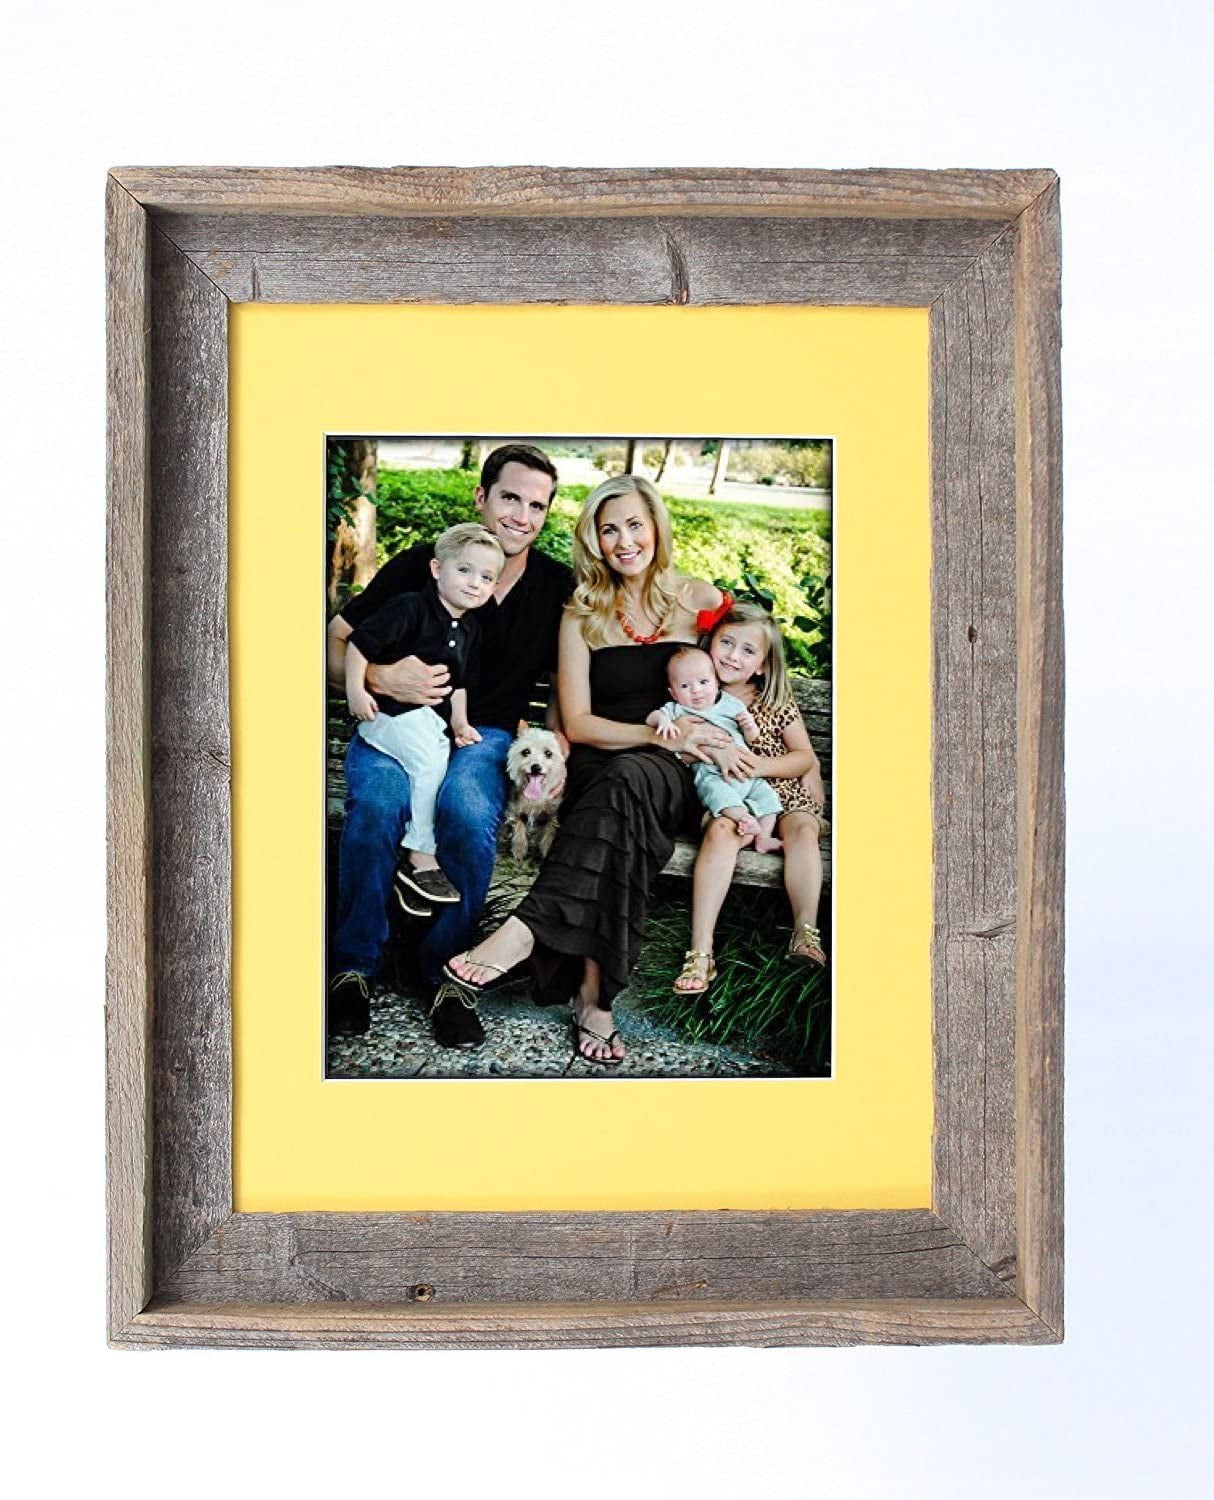 Autograph signature Mat for an 8x10 photo and 16x20 frame, 